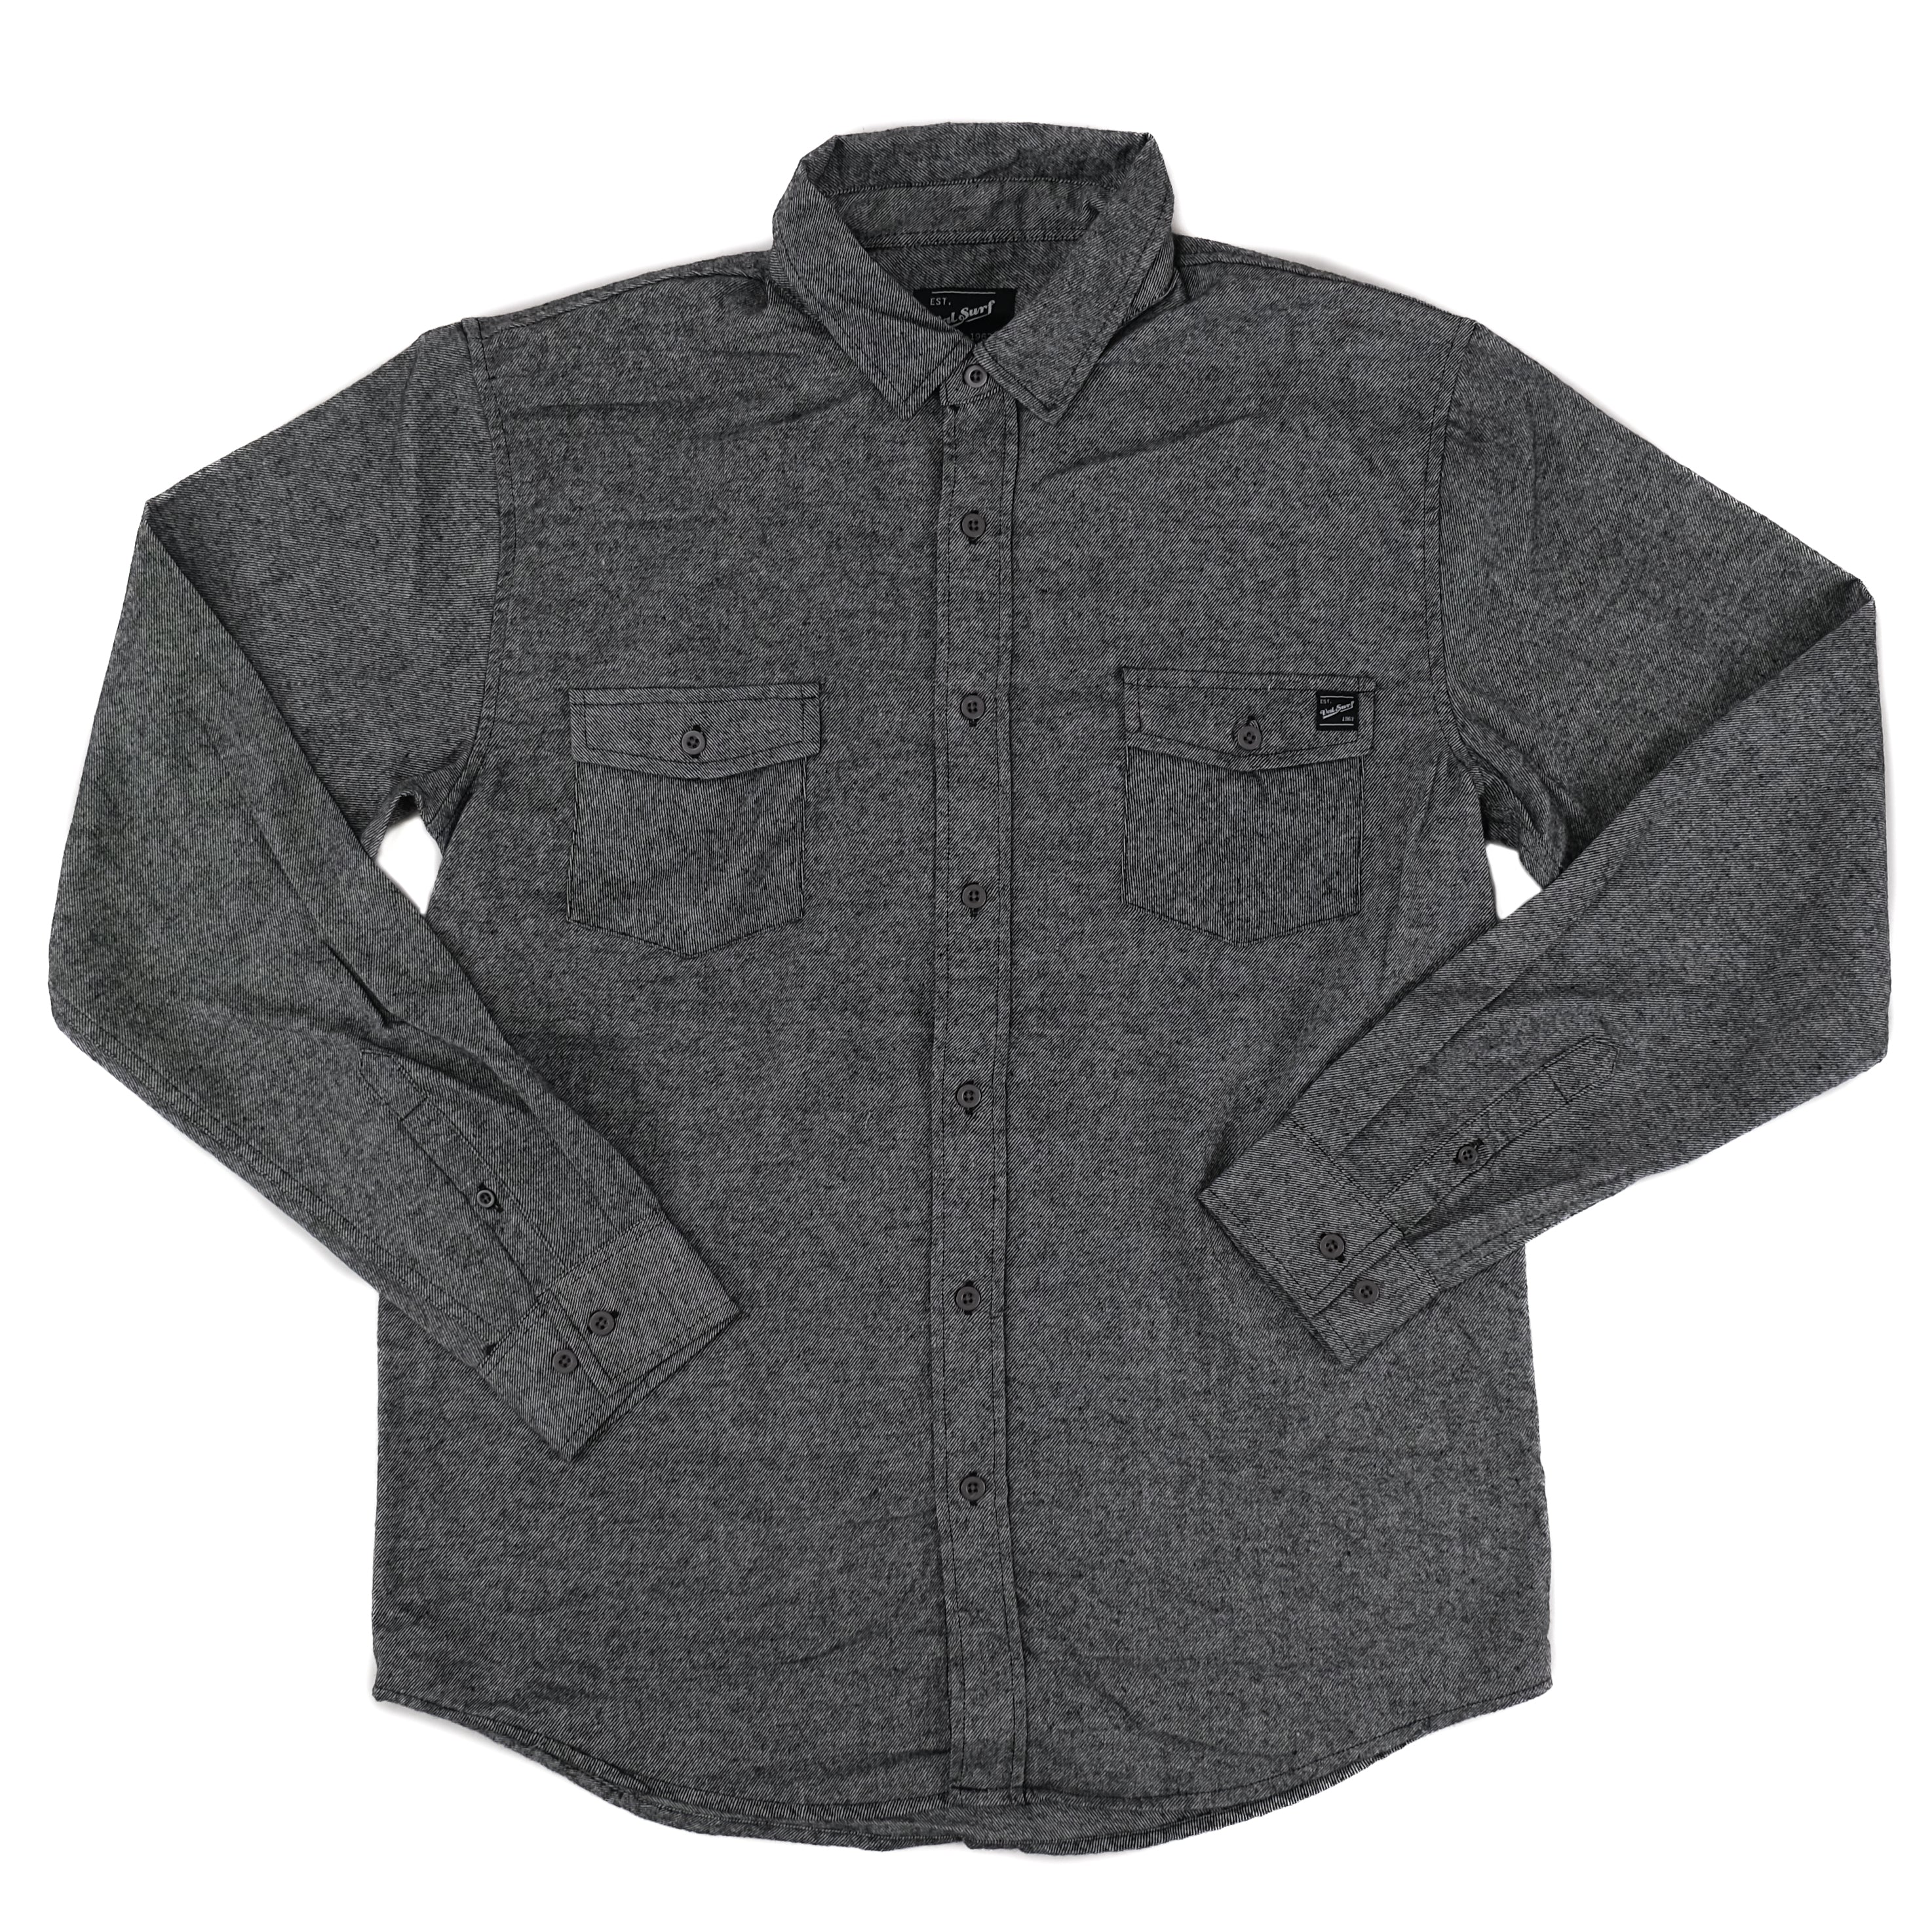 Hinterland Flannel - Charcoal